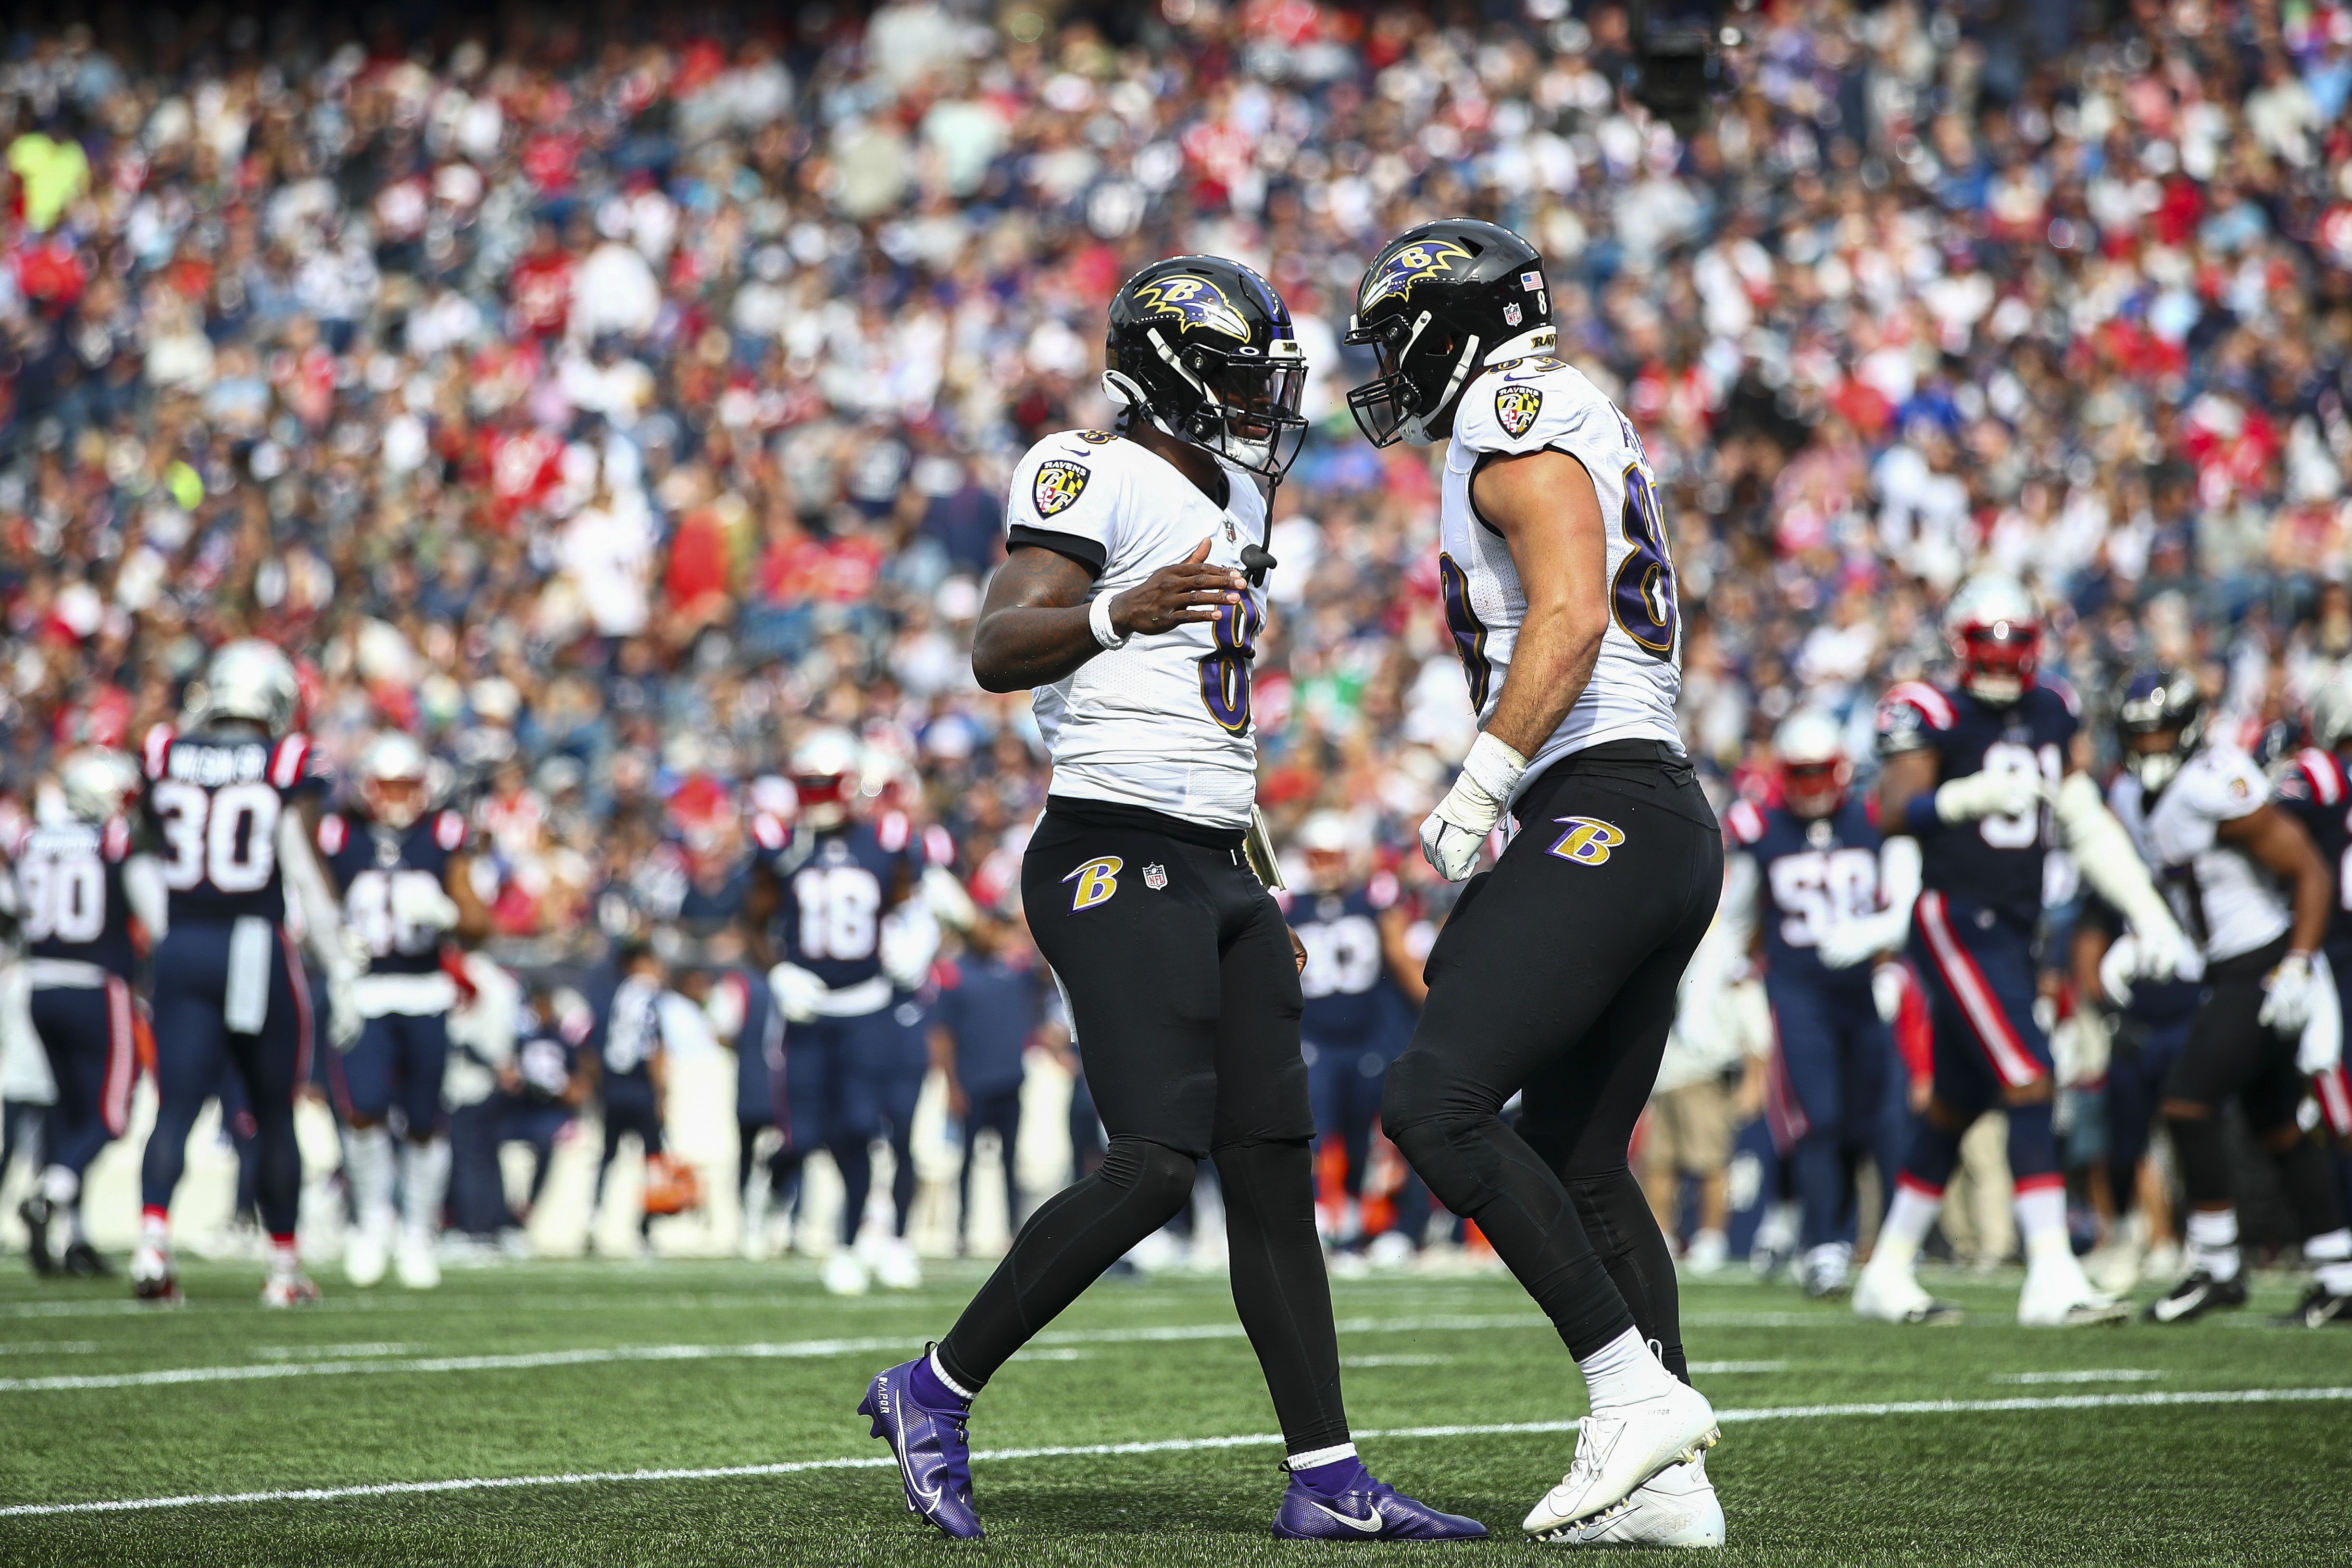 Quarterback Lamar Jackson #8 of the Baltimore Ravens celebrates with tight end Mark Andrews #89 of the Baltimore Ravens after Andrews’ touchdown during the second quarter against the New England Patriots at Gillette Stadium on September 25, 2022 in Foxborough, Massachusetts.